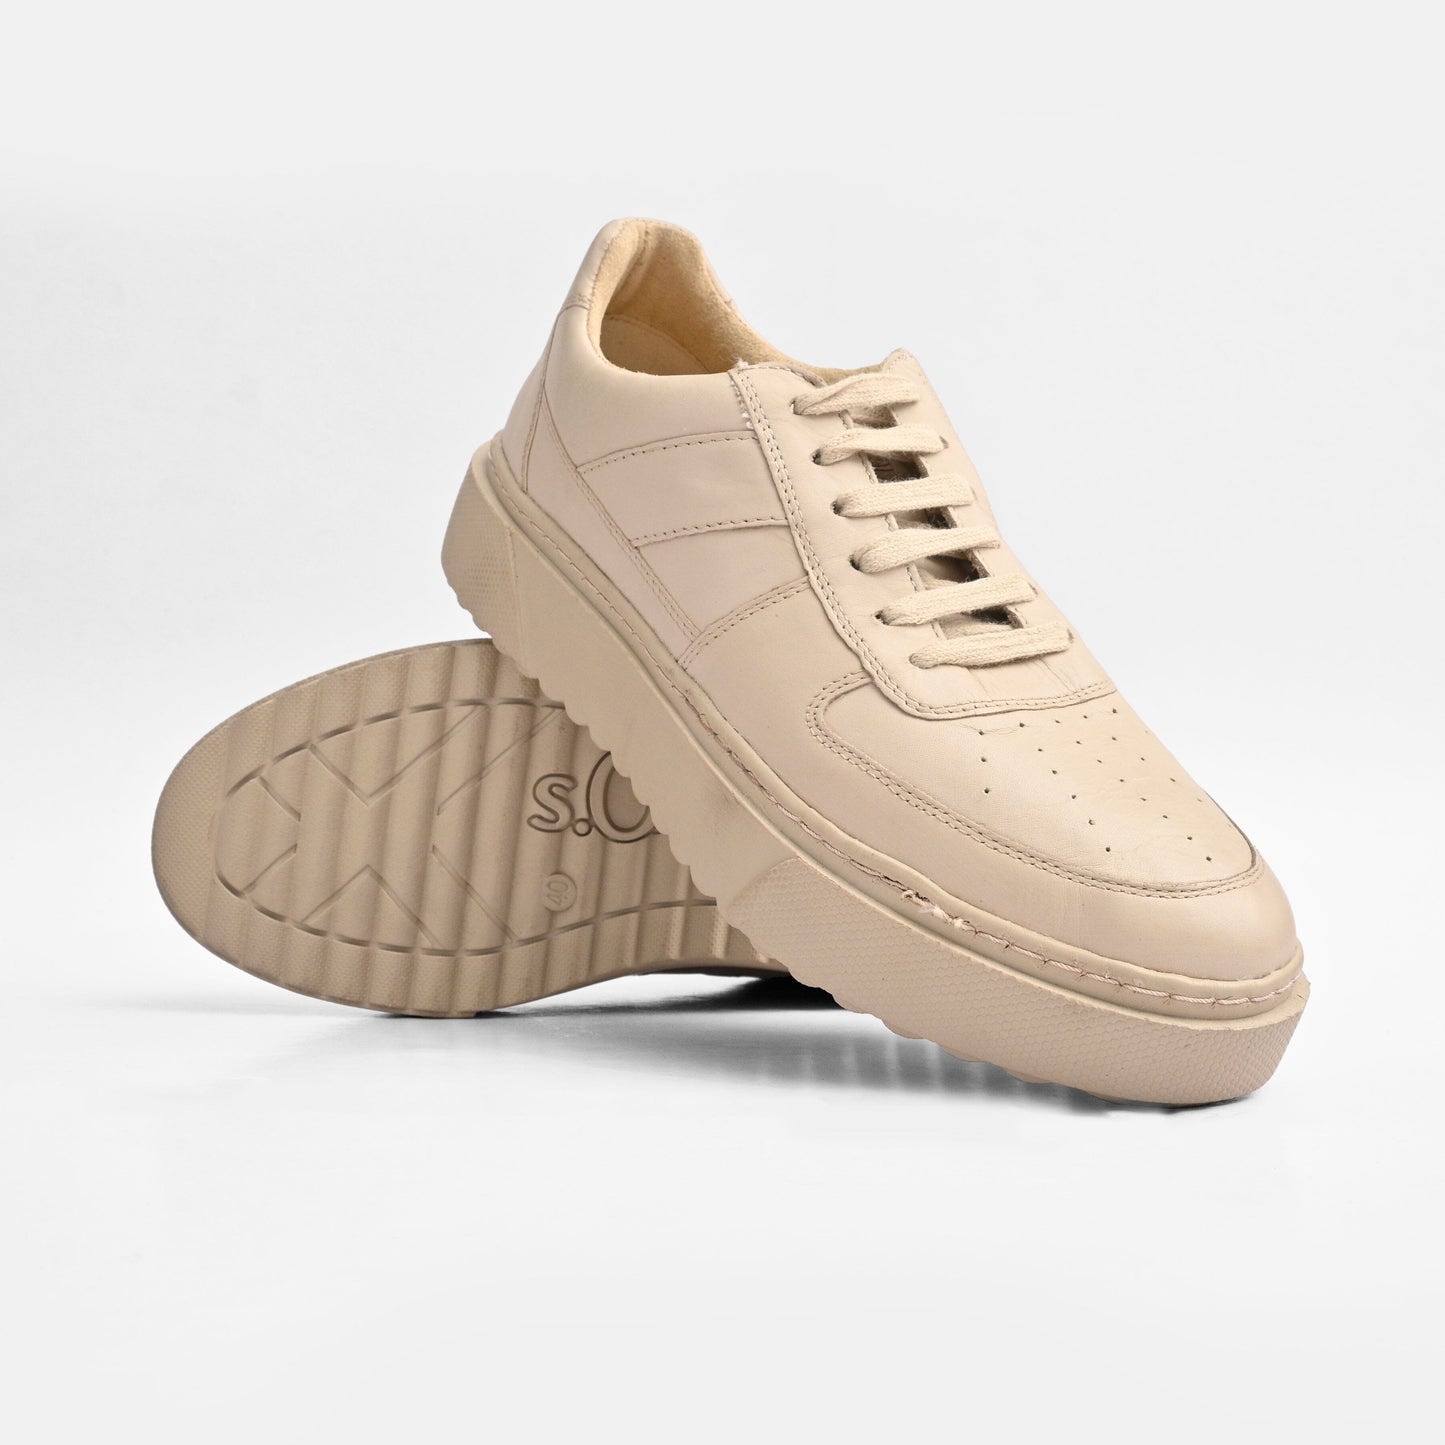 S.Oliver Unisex Soft Sole Genuine Upper Leather Sneakers Unisex Shoes Shafi Pvt. Limited Beige EUR 36 